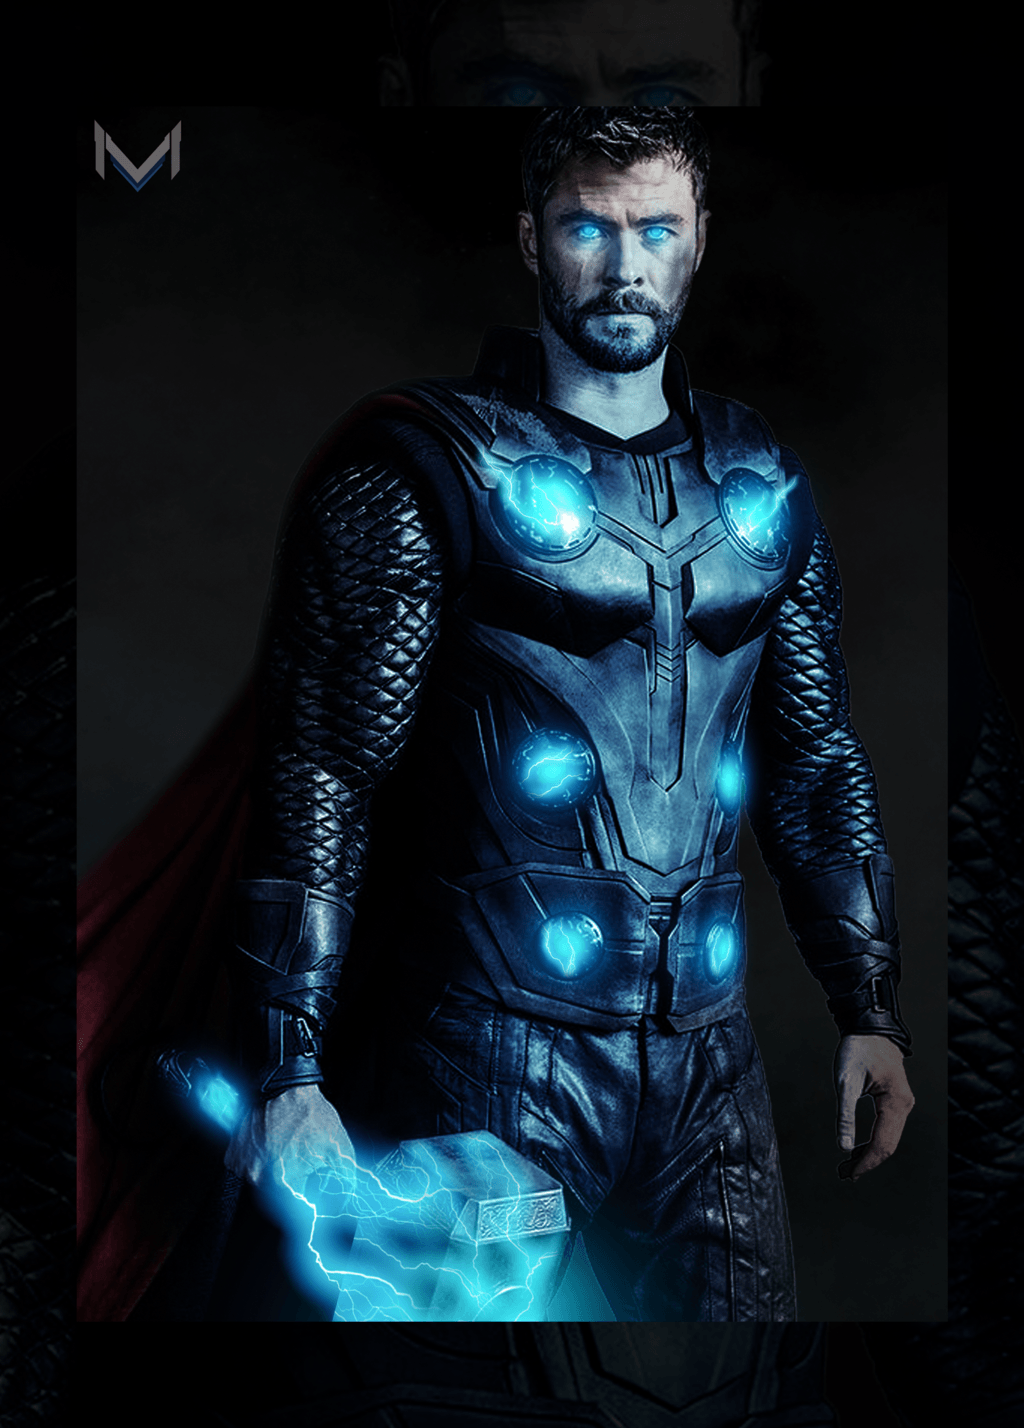 Thor, the mighty Avenger, stands in the dark with his cape flowing behind him. - Thor